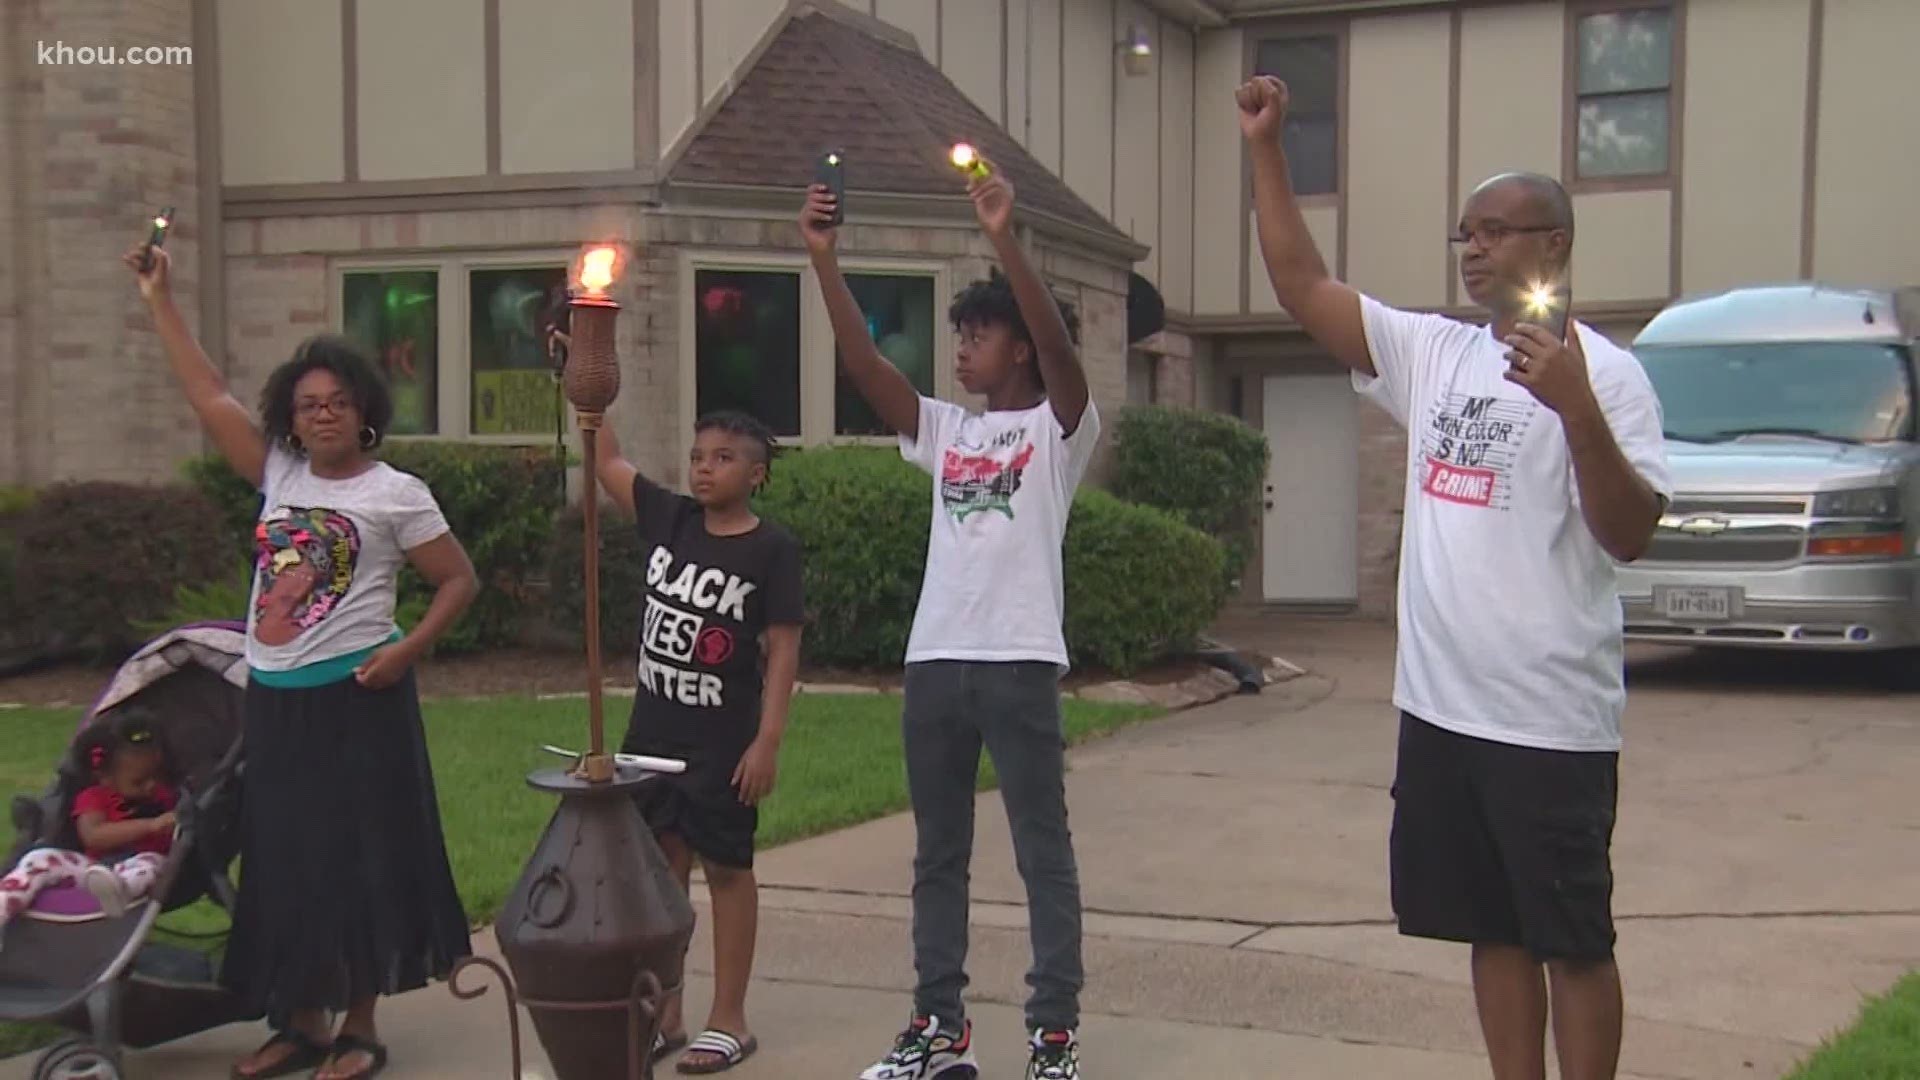 Friday evening, a Fort Bend County family helped bring a community together for Juneteenth.